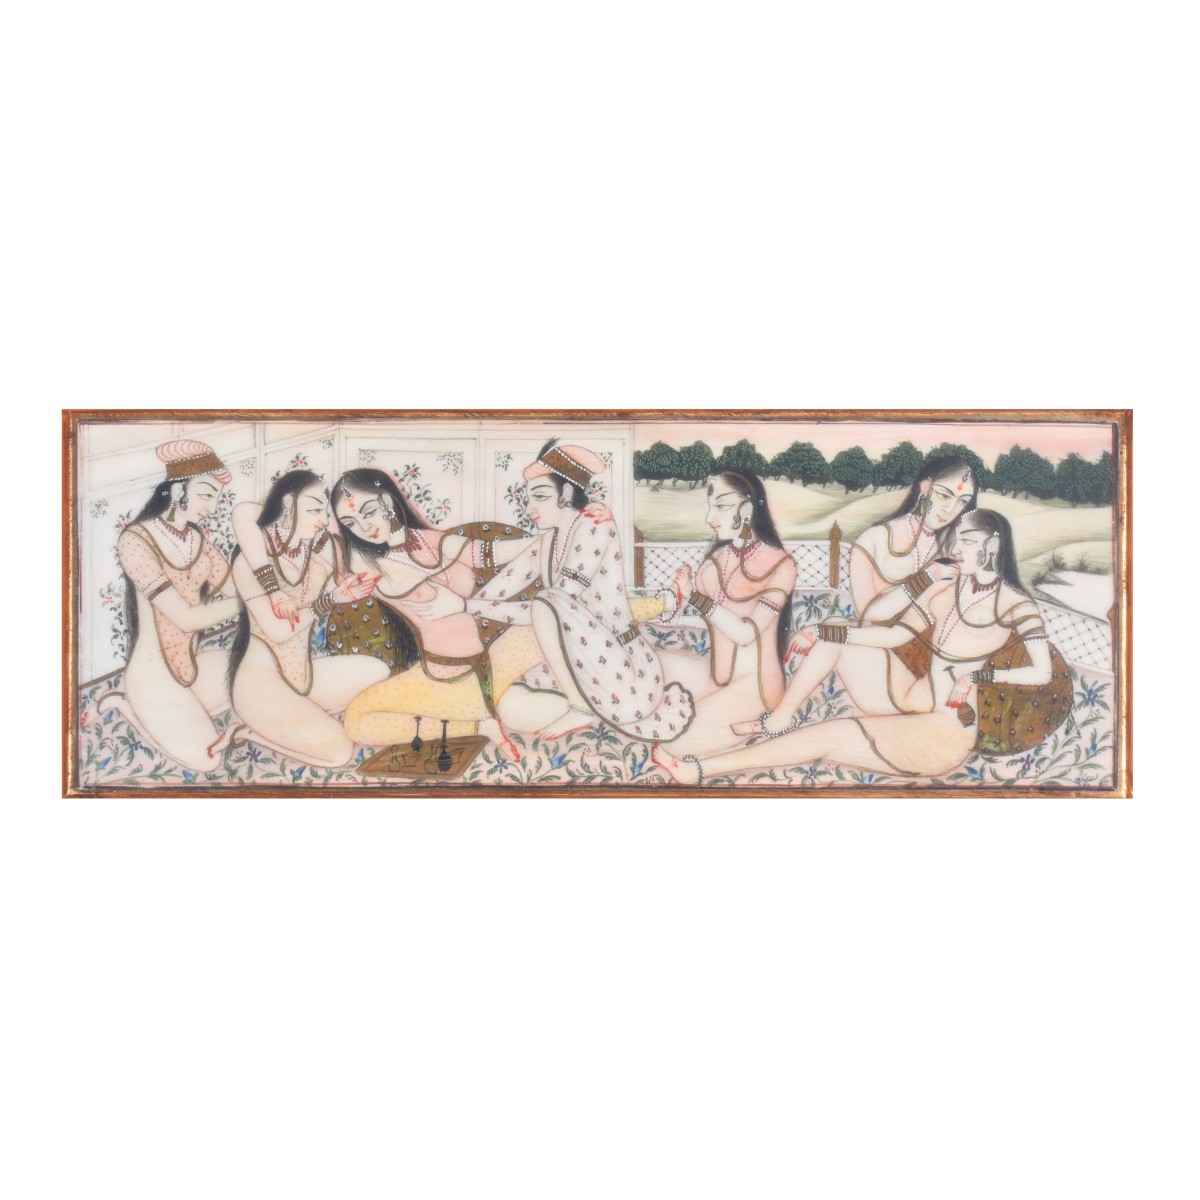 Indian Erotic Painting